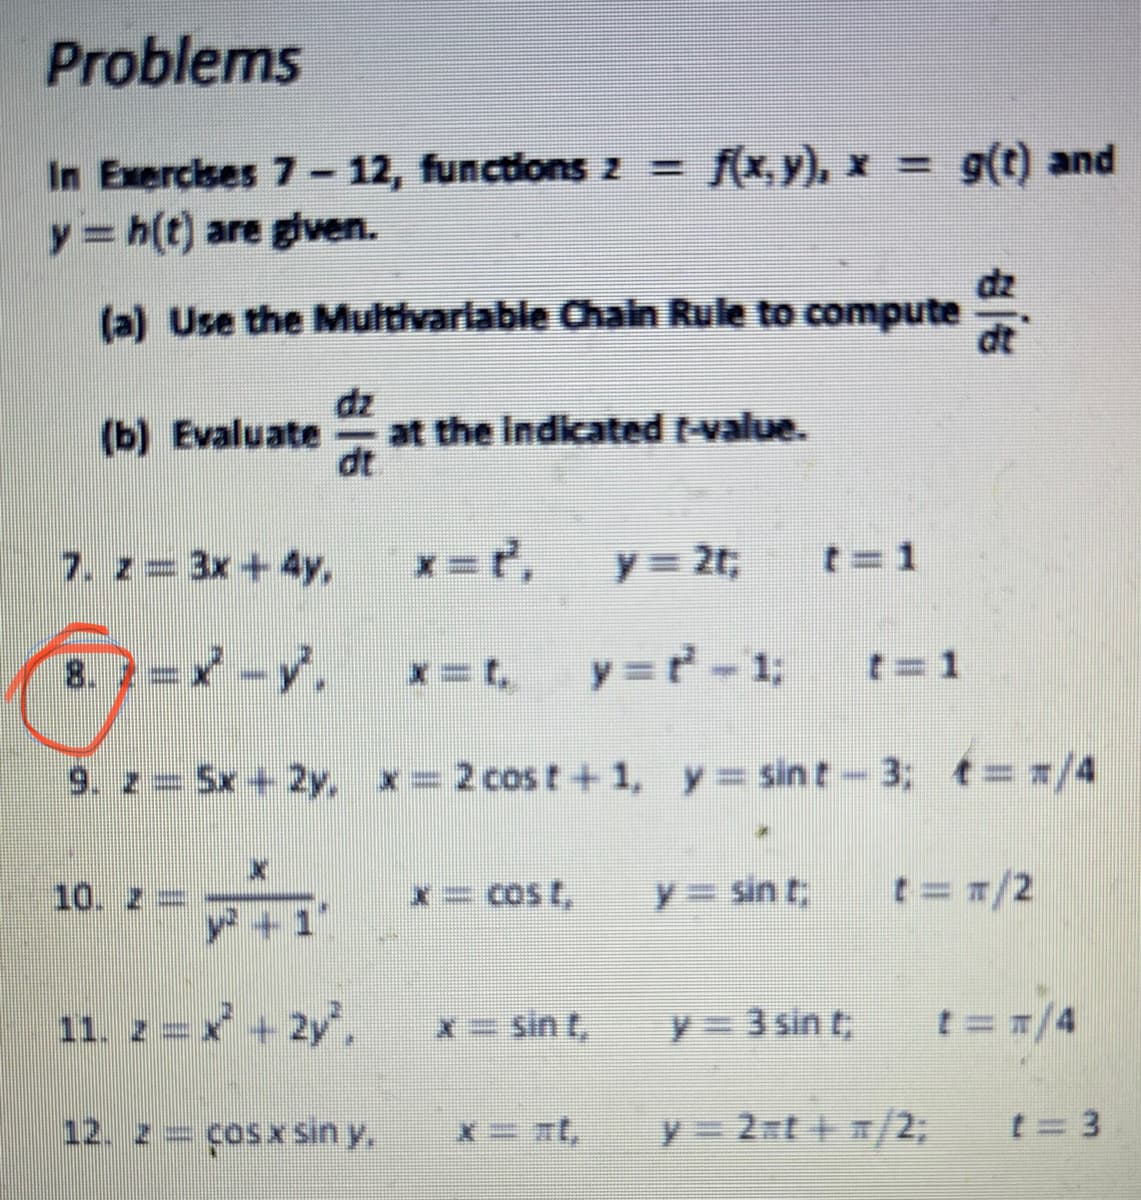 Problems
In Exercises 7- 12, functions z =
f(x, y), x = g(t) and
এ(0) nd
y=h(t) are given.
dz
(a) Use the Multivariable Chain Rule to compute
dz
at the indicated t-value.
dt
(b) Evaluate
7. z 3x+4y,
y= 2t;
t=1
8.? =x -y,
y =r-1;
x=t,
t=1
9. z Sx + 2y, x= 2 cost+1, y sin t- 3; t=/4
10. Z=
x= Cos t,
y = sin t;
t==/2
y+1"
11. z=x + 2y,
x= sin t,
y= 3 sin t
t=T/4
12. z = çosx sin y.
y= 2 t /2;
t= 3
